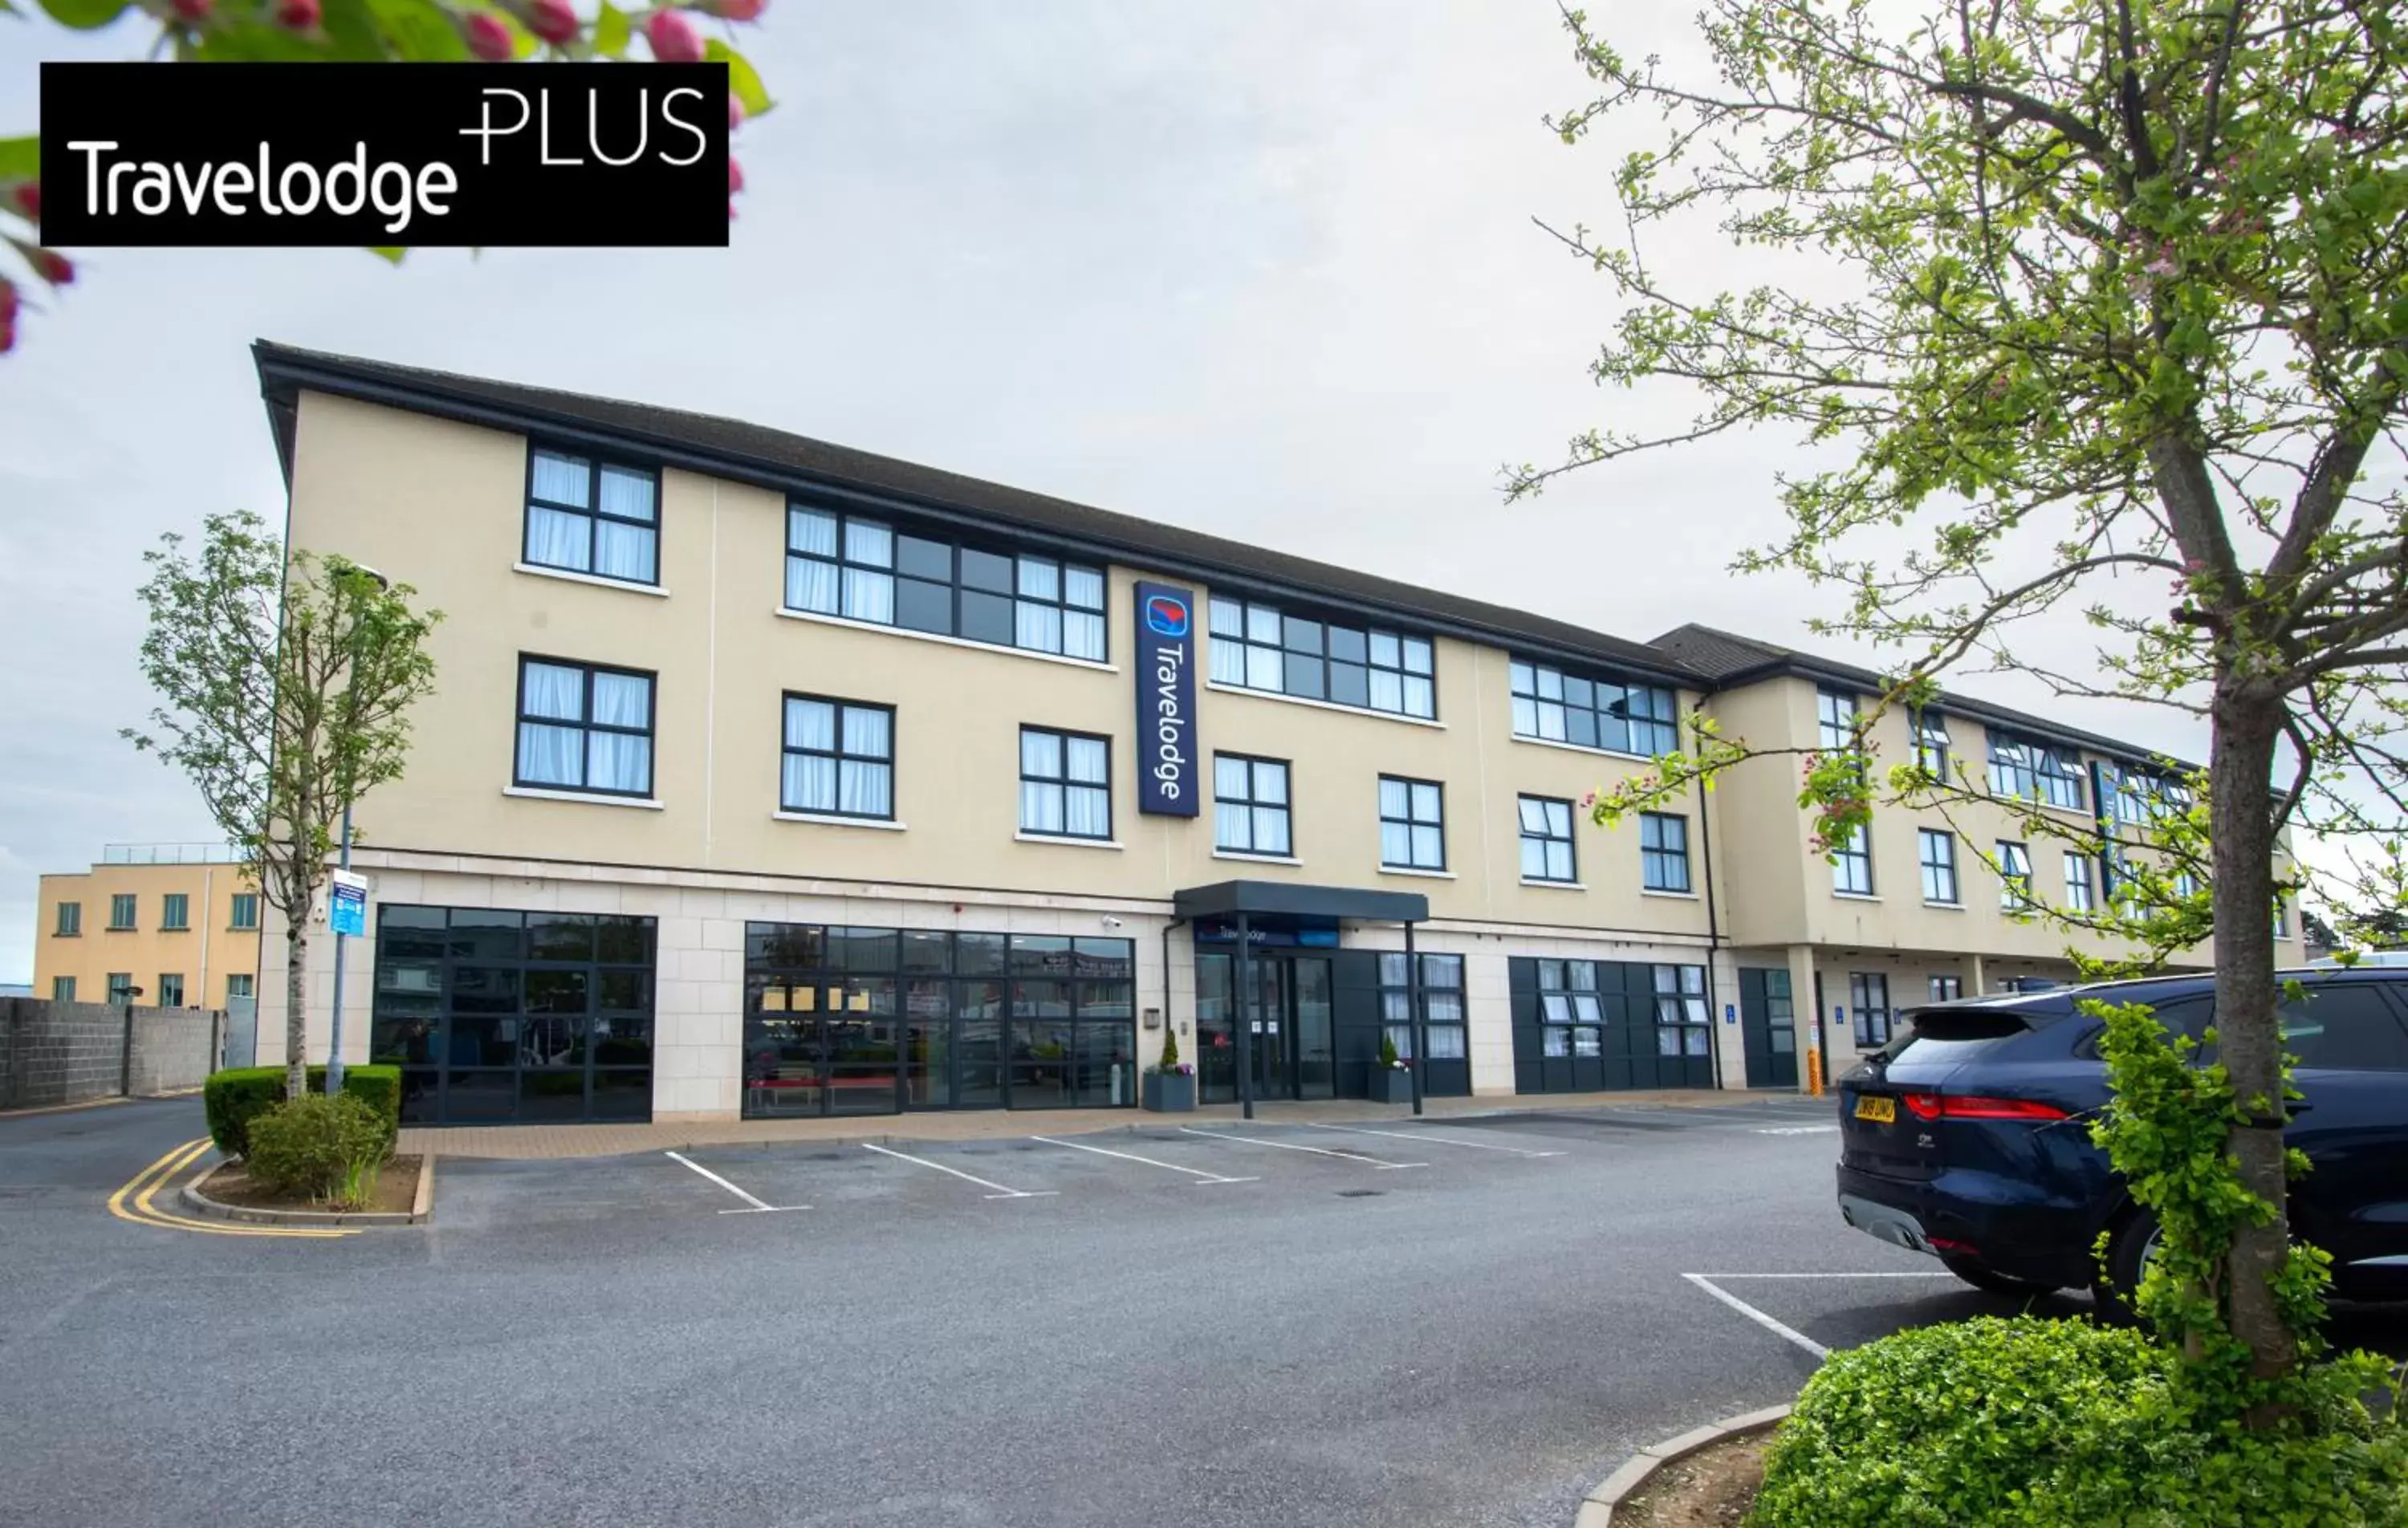 Property Building in Travelodge Galway